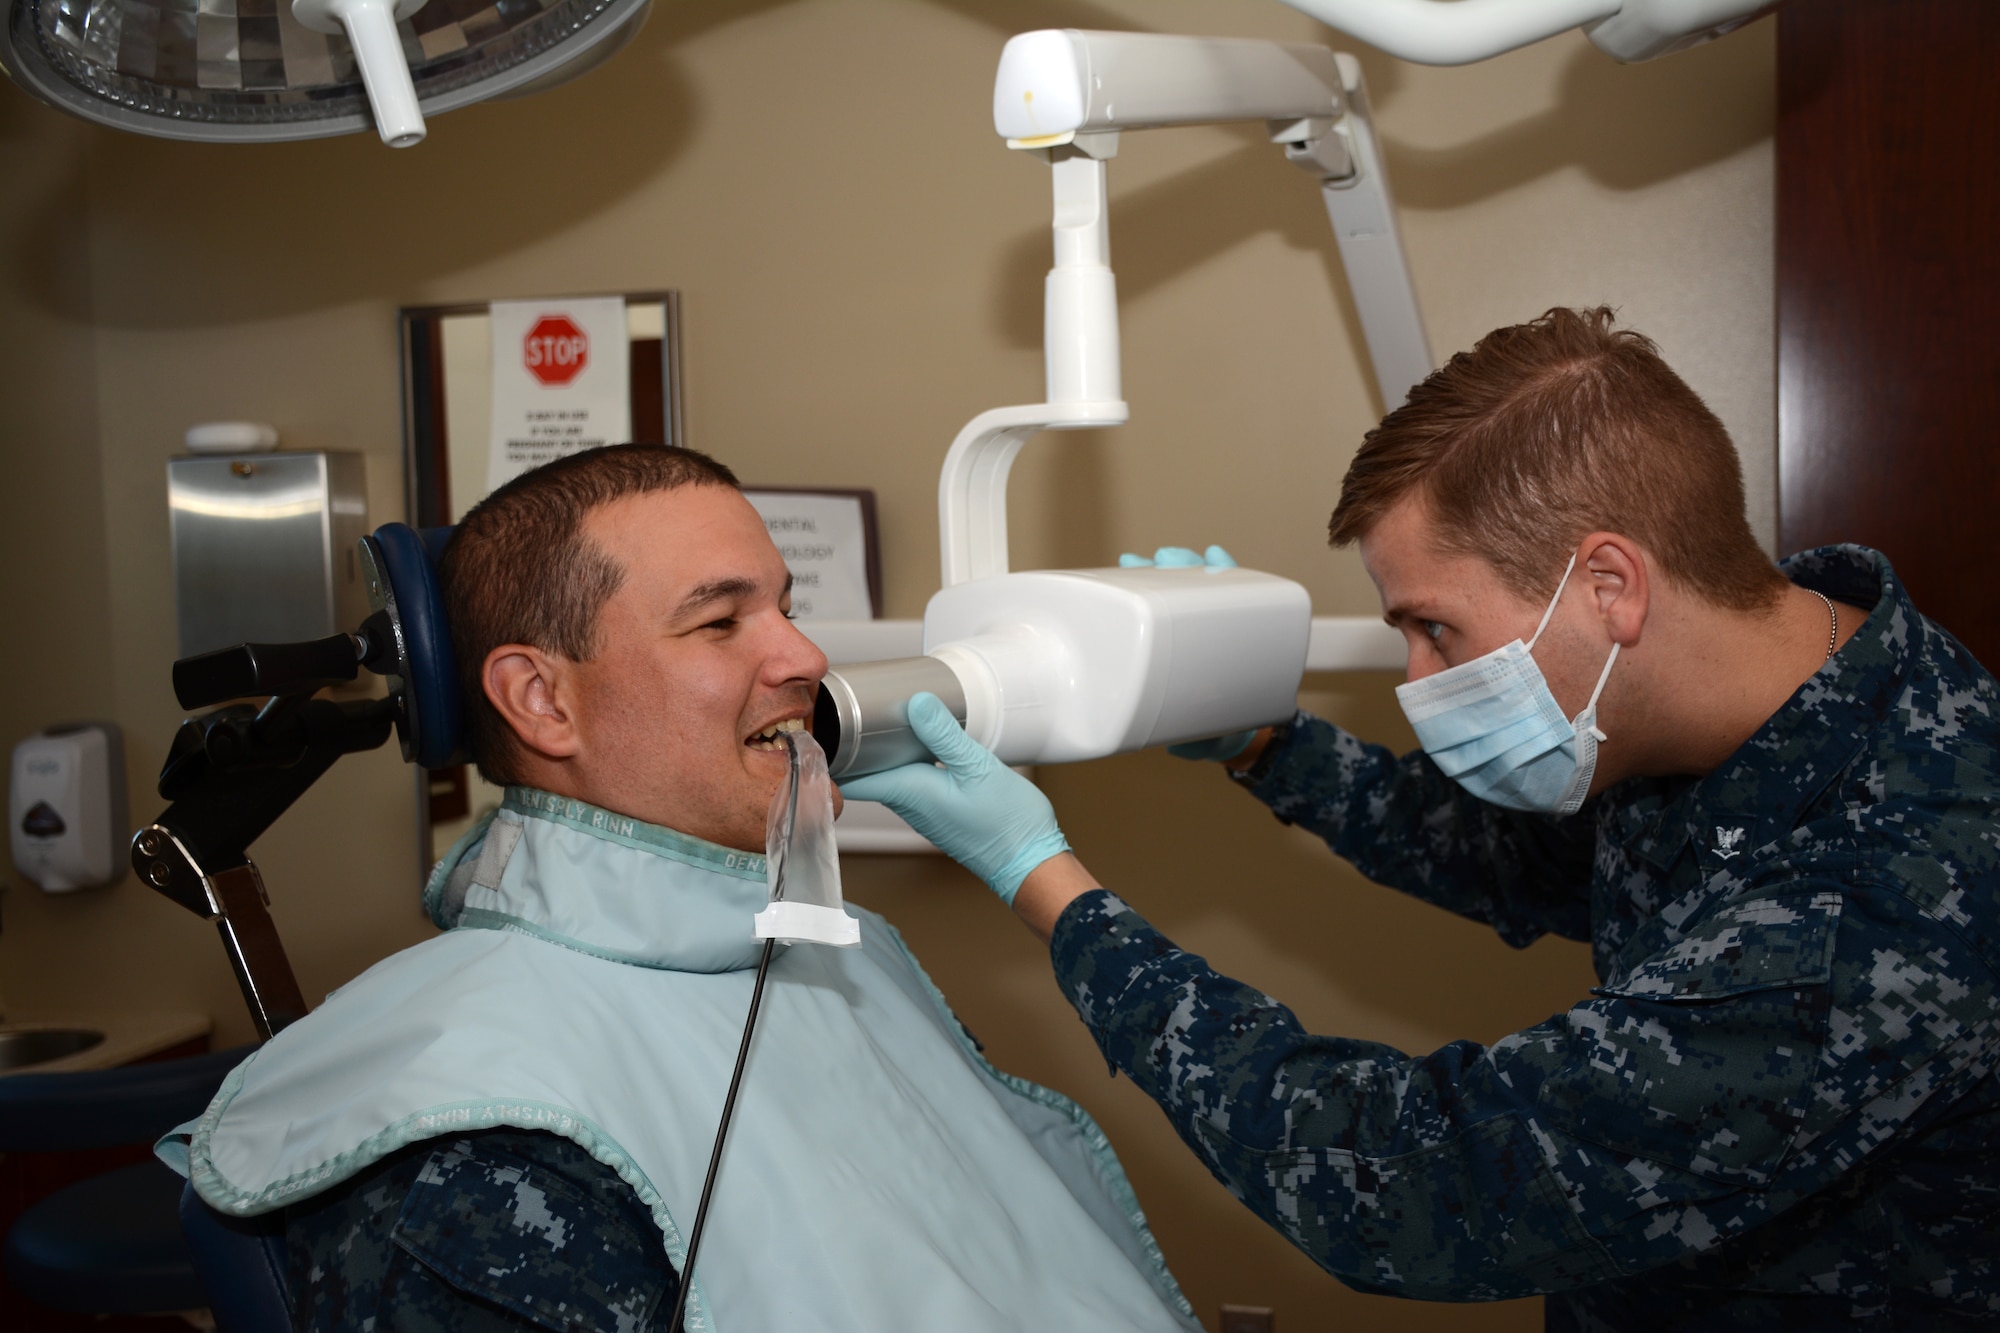 Navy Dental Assistant Petty Officer 3rd Class Donald Kern positions the digital x-ray camera on his patient on Oct. 4, 2014 at Tinker Air Force Base, to take bitewing
x-rays as part of the annual dental exam.  The Navy reserve dental team
serves approximately 30 patients a month.  (U.S. Air Force photo/Staff Sgt. Lauren Gleason)
